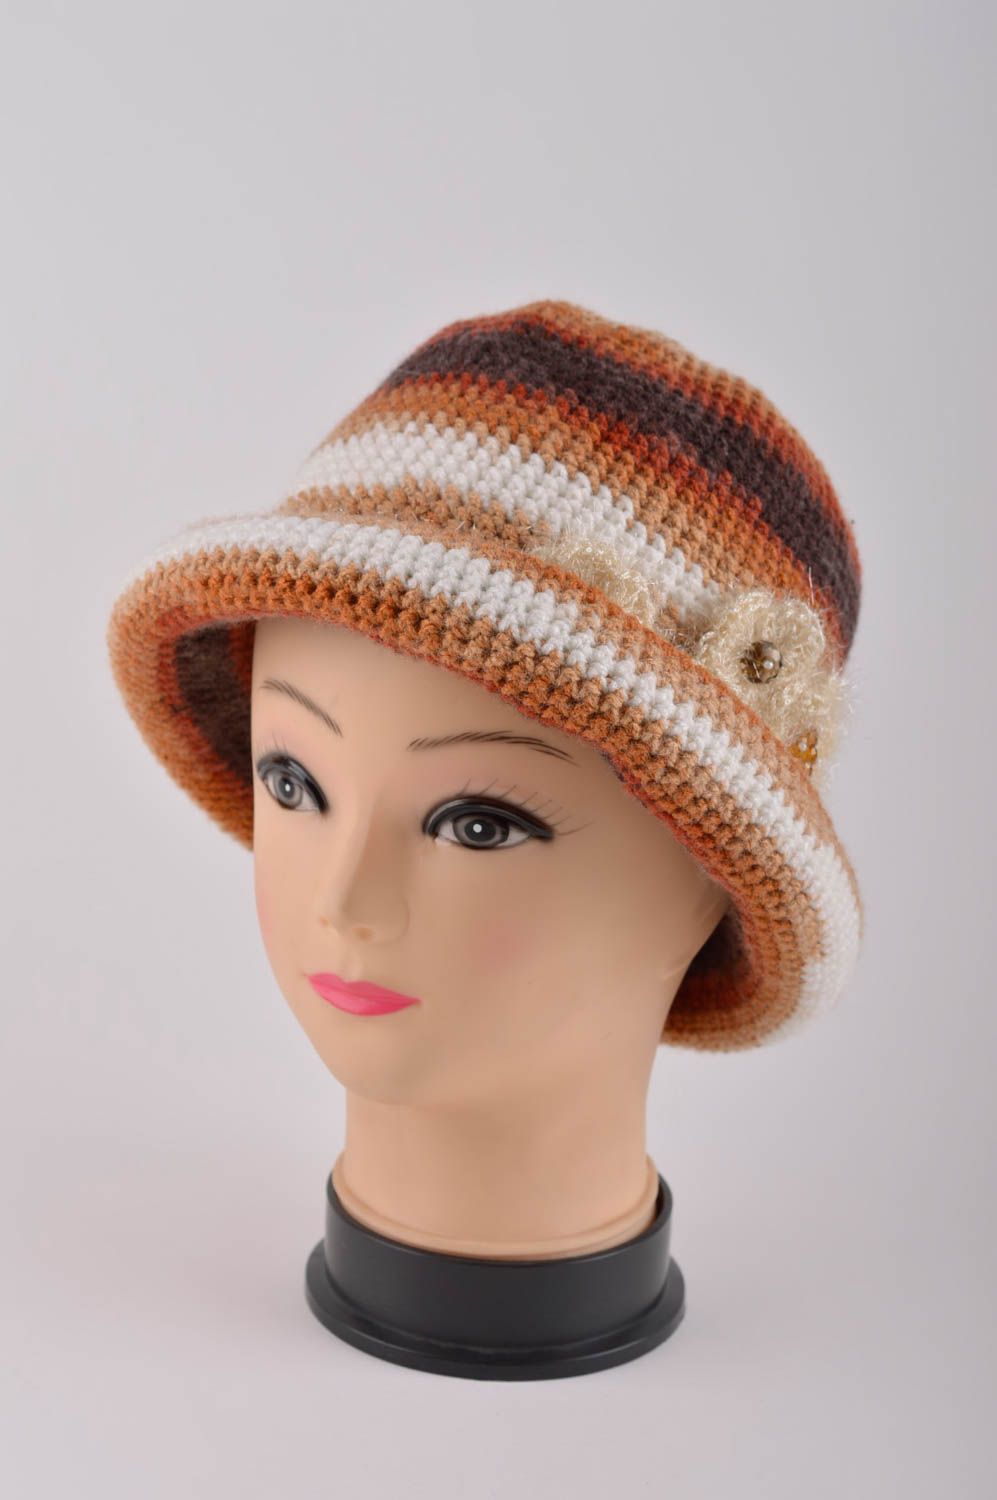 Handmade hat woolen hat for women unusual gift ideas knitted hat for girls photo 2